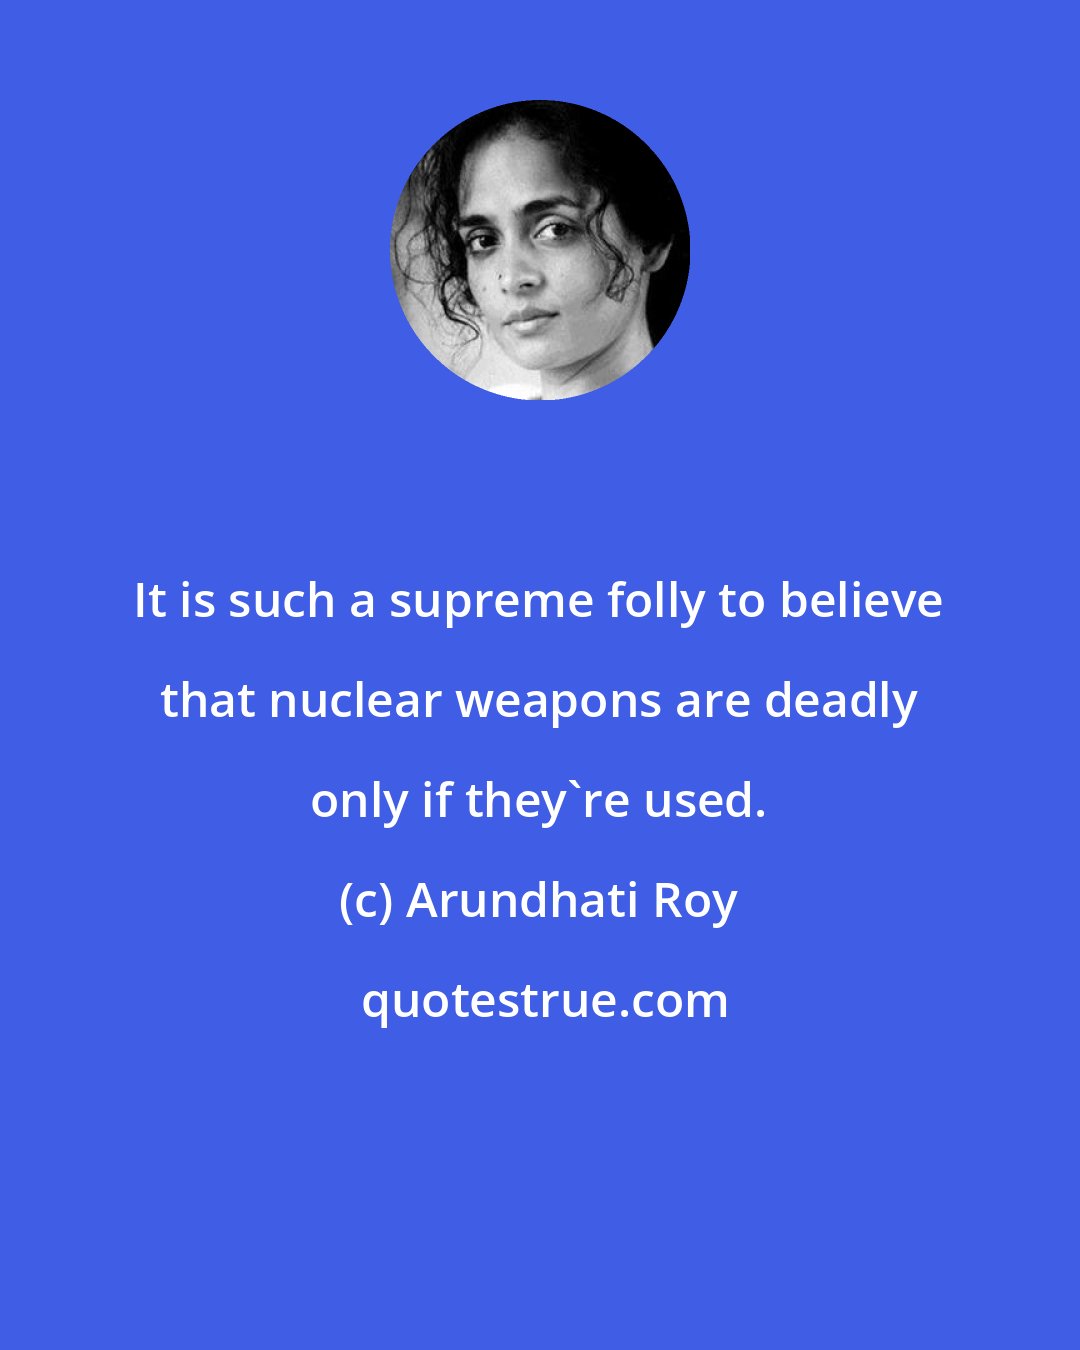 Arundhati Roy: It is such a supreme folly to believe that nuclear weapons are deadly only if they're used.